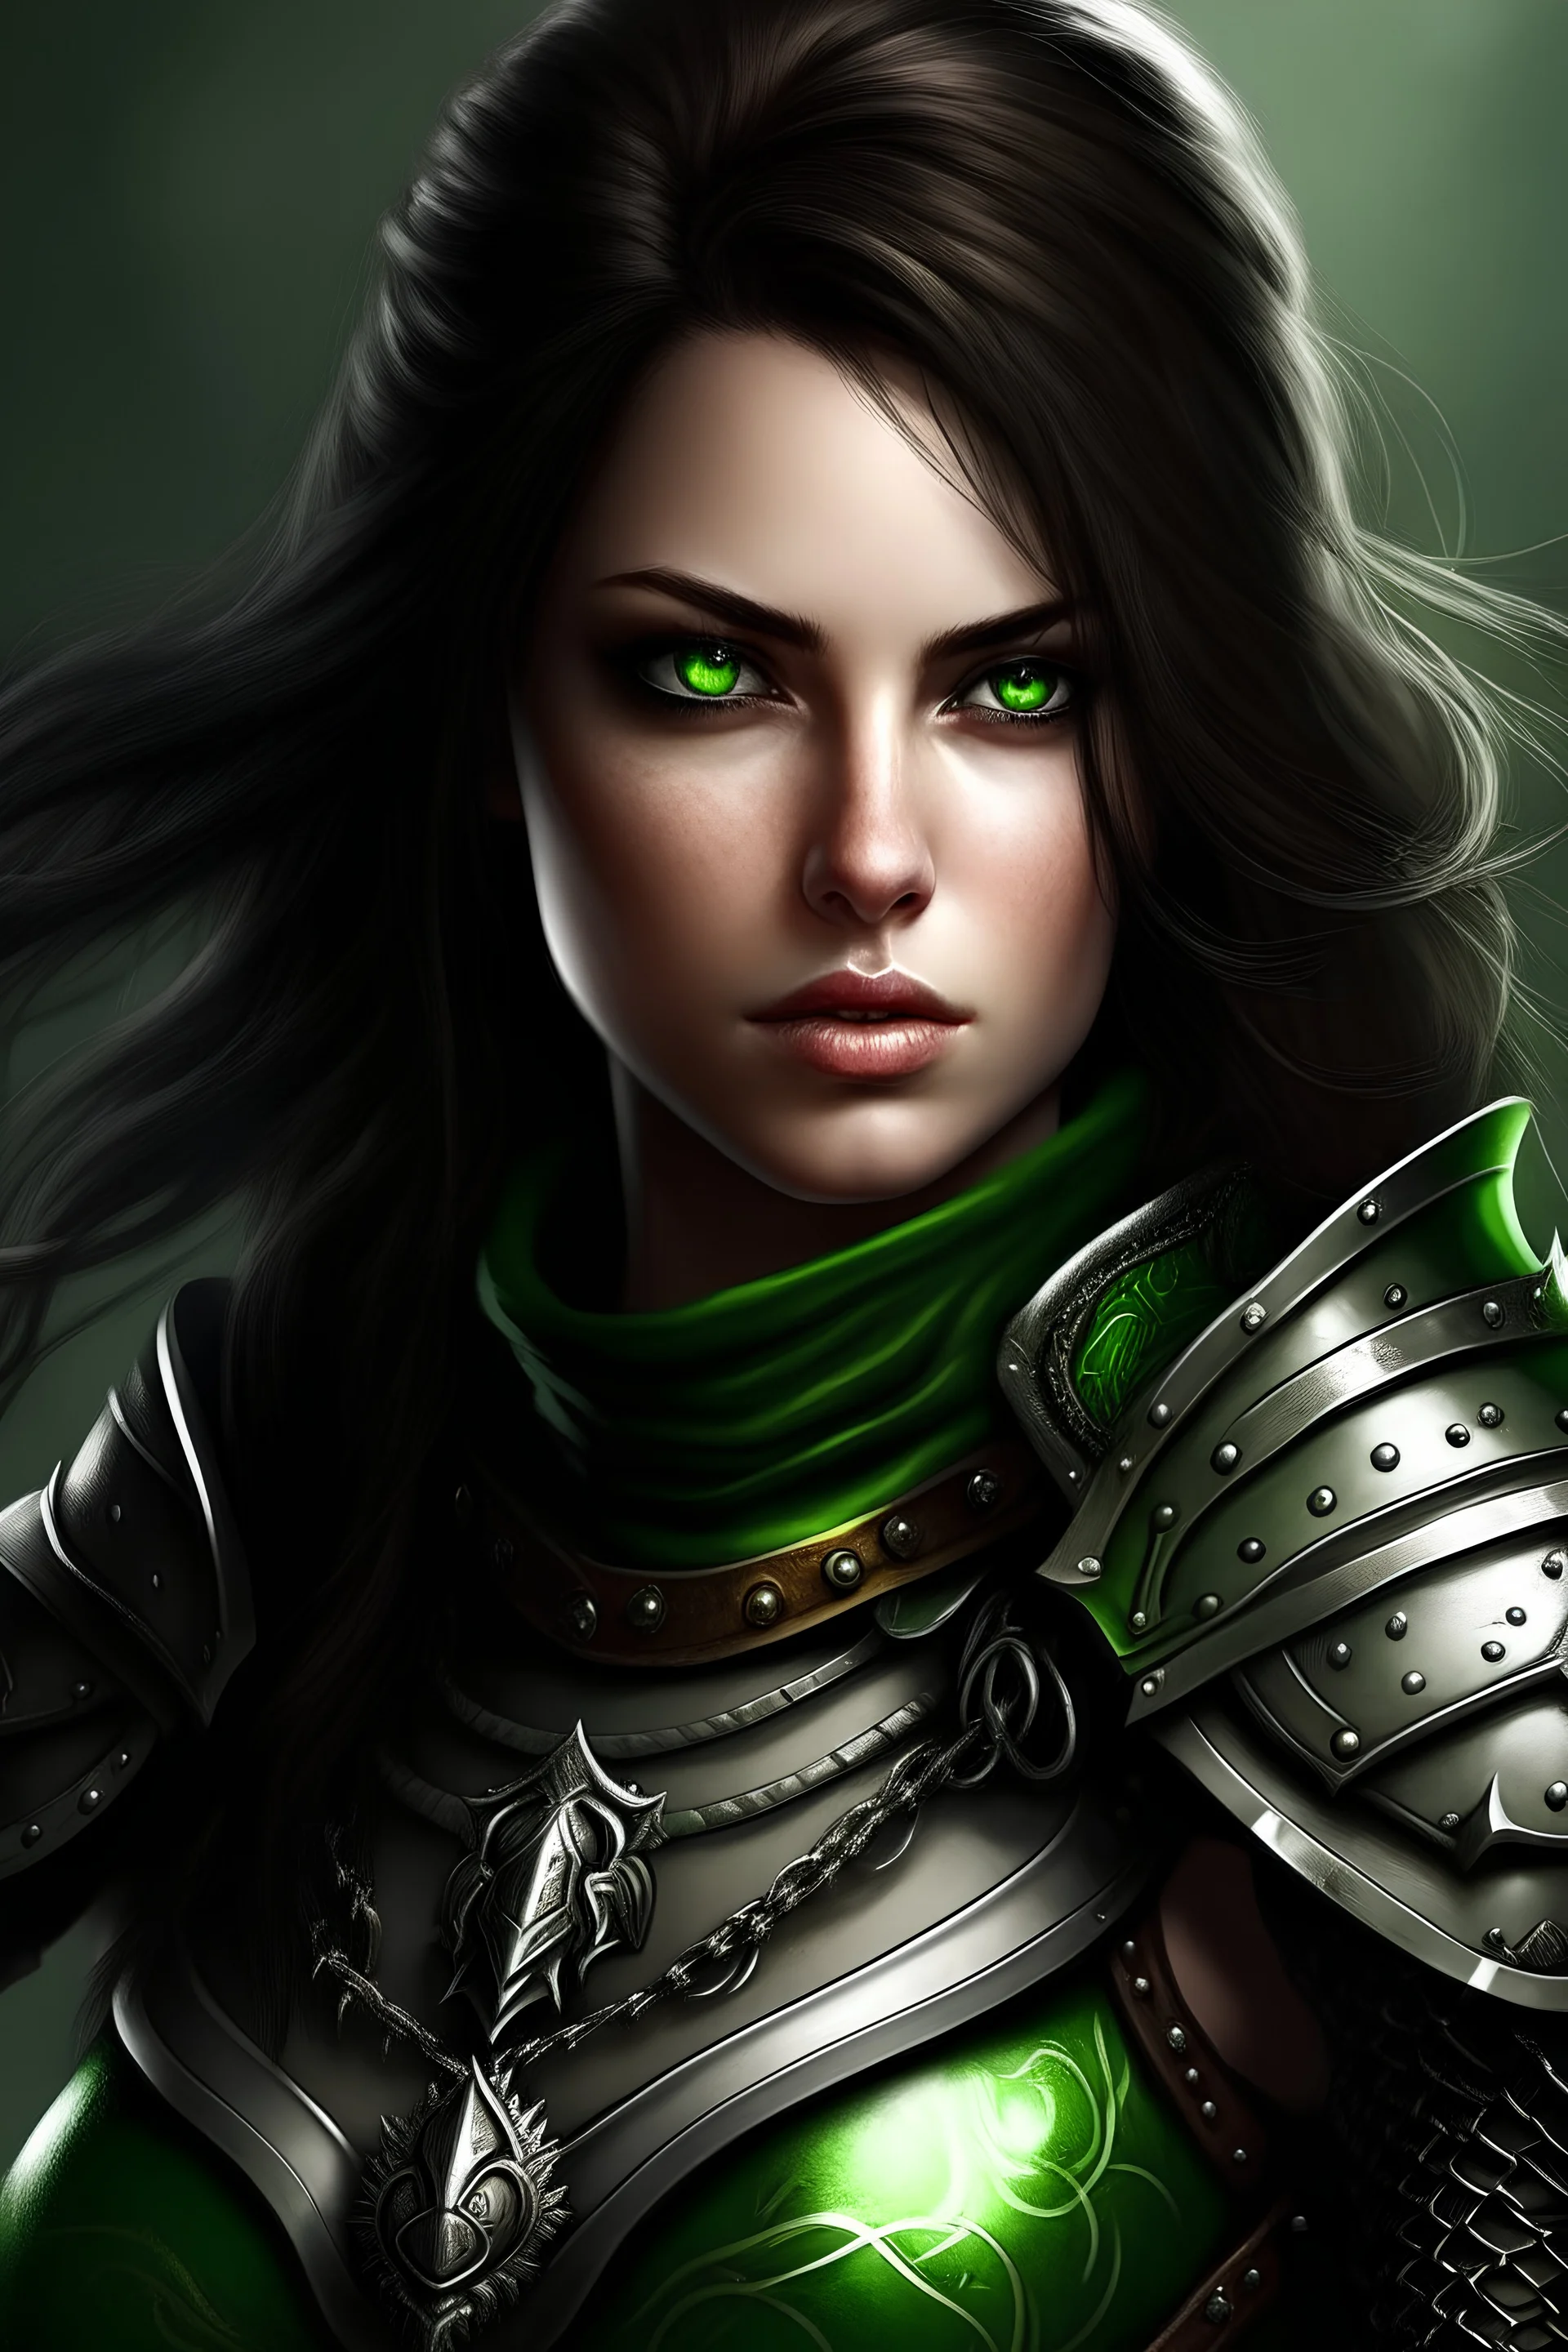 Hot Brunette Knight Lady with green eyes and spiked armour